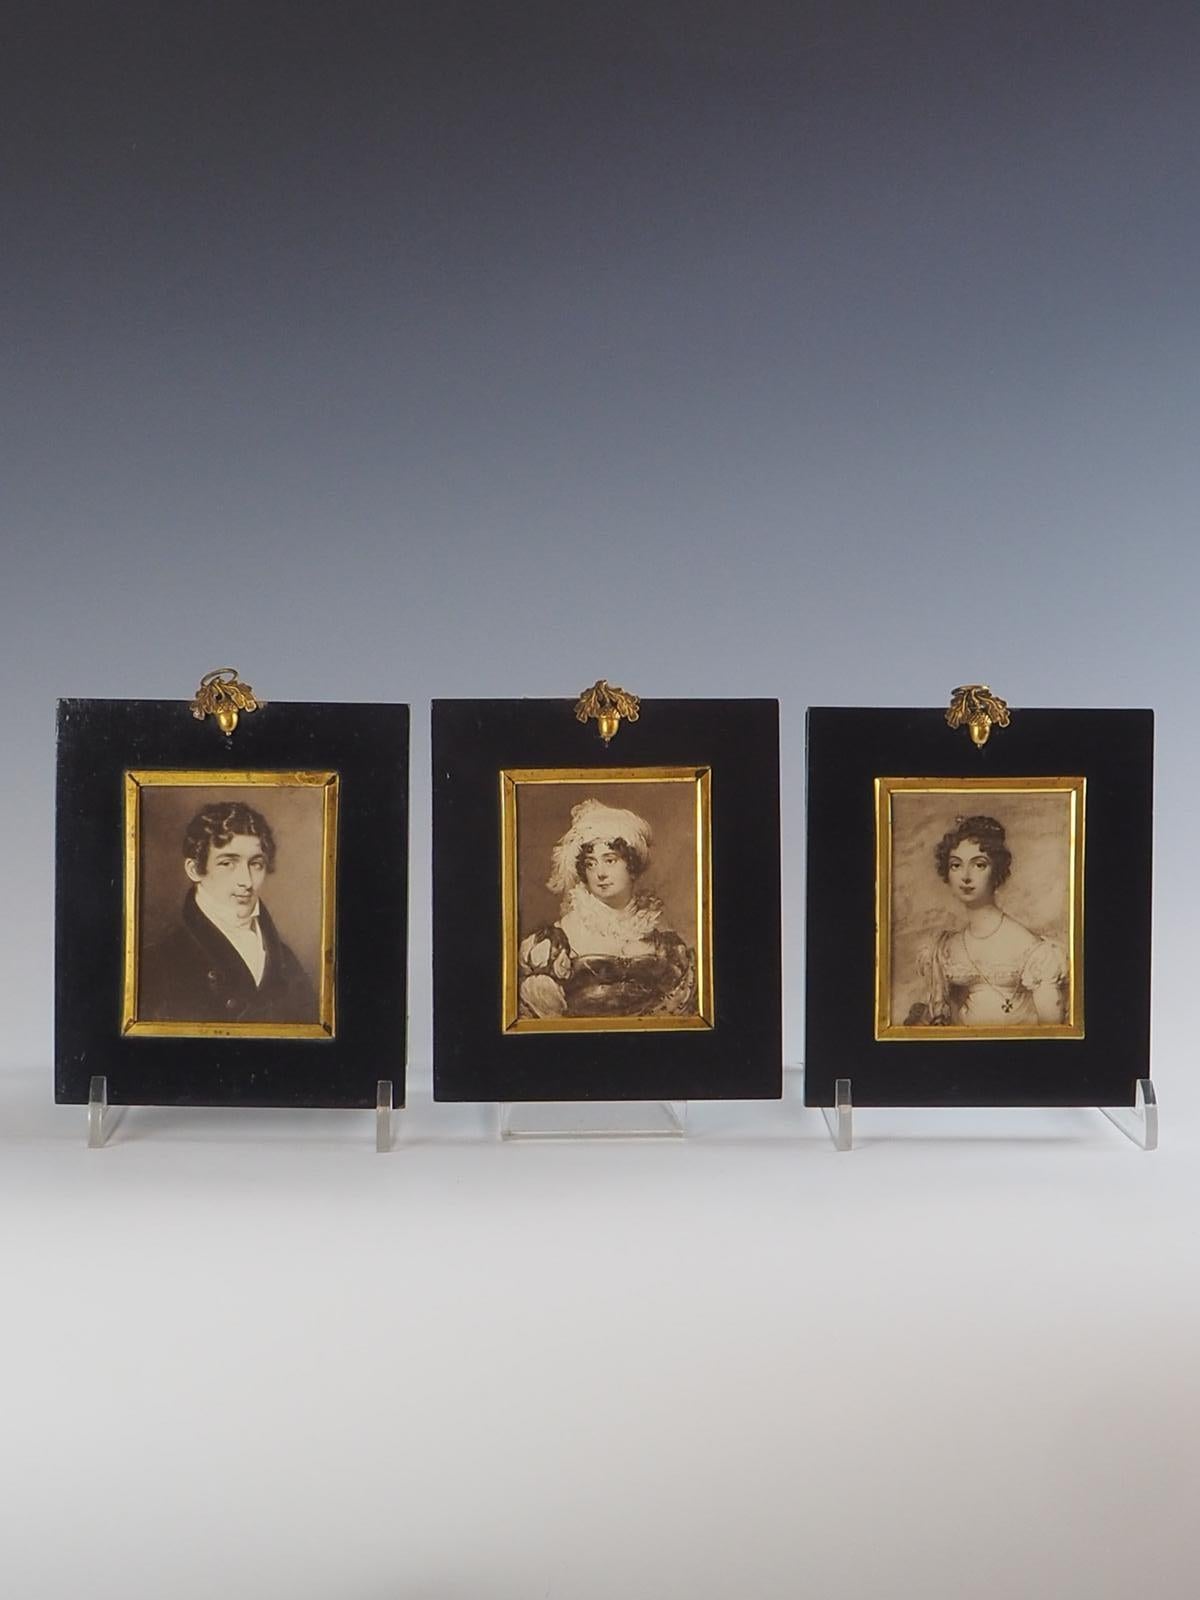 Set of 3 Antique Acorn Miniatures with Original Photographs is truly a remarkable piece of history. The beautifully crafted black miniature ebony frames, adorned with gilded acorns, add a touch of elegance to any space.

What sets these miniatures